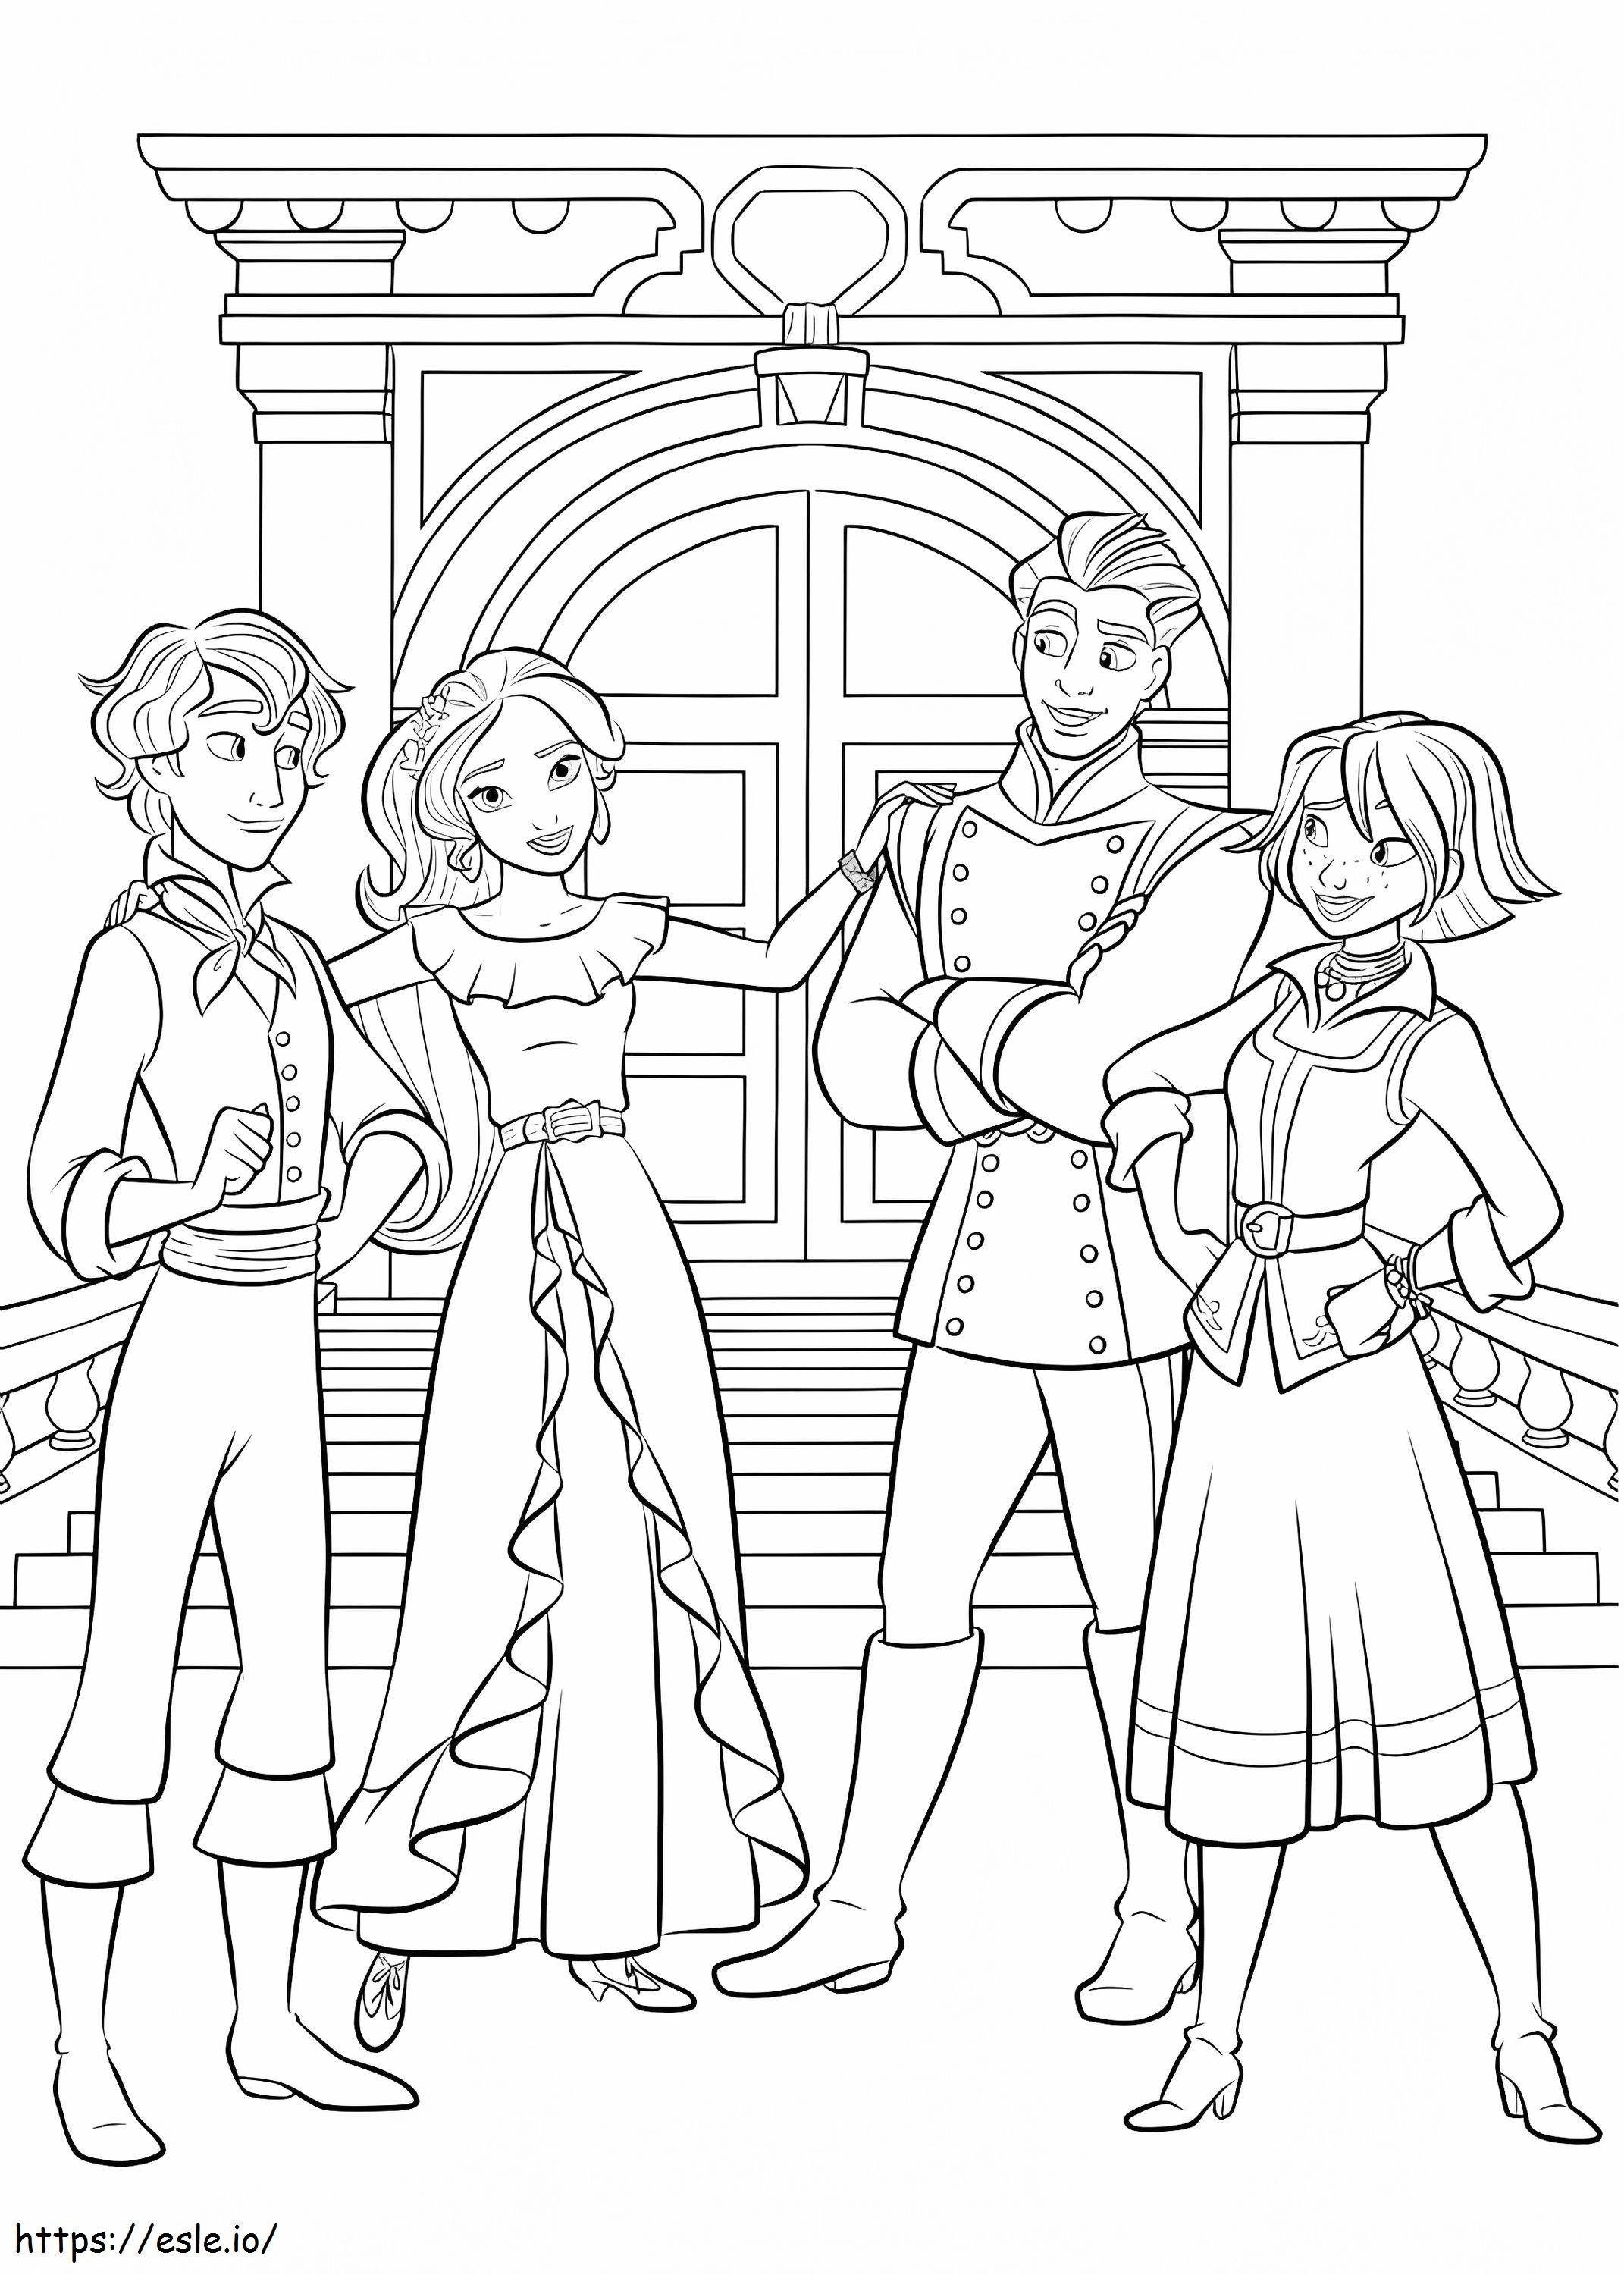 1535079087 Teen Of Avalor A4 coloring page